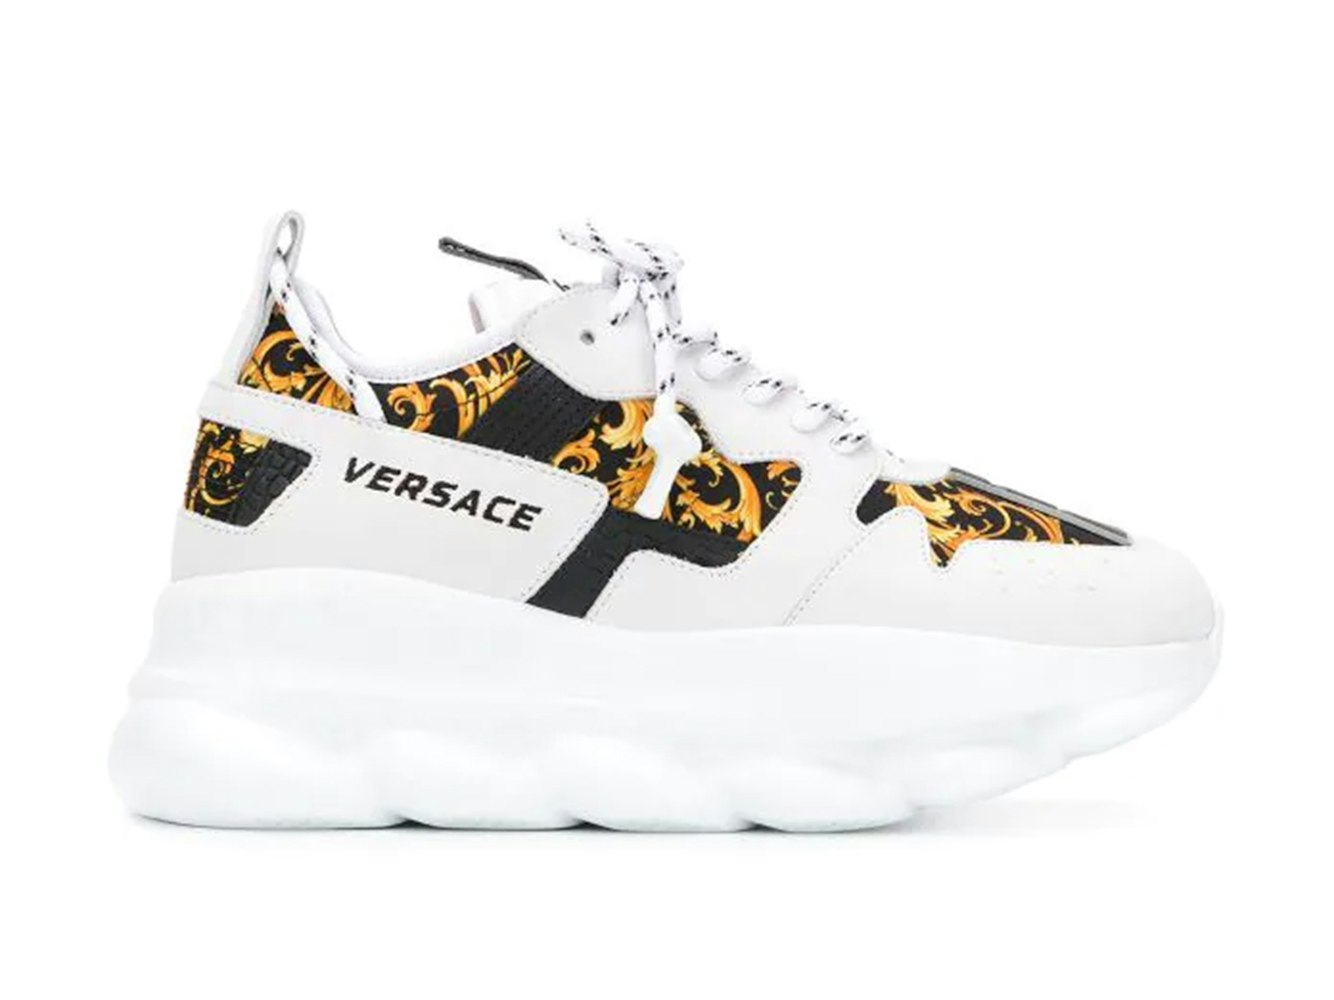 VERSACE Chain Reaction Low cut Sneakers Yellow White EUR 39 Japan [Used] |  eBay